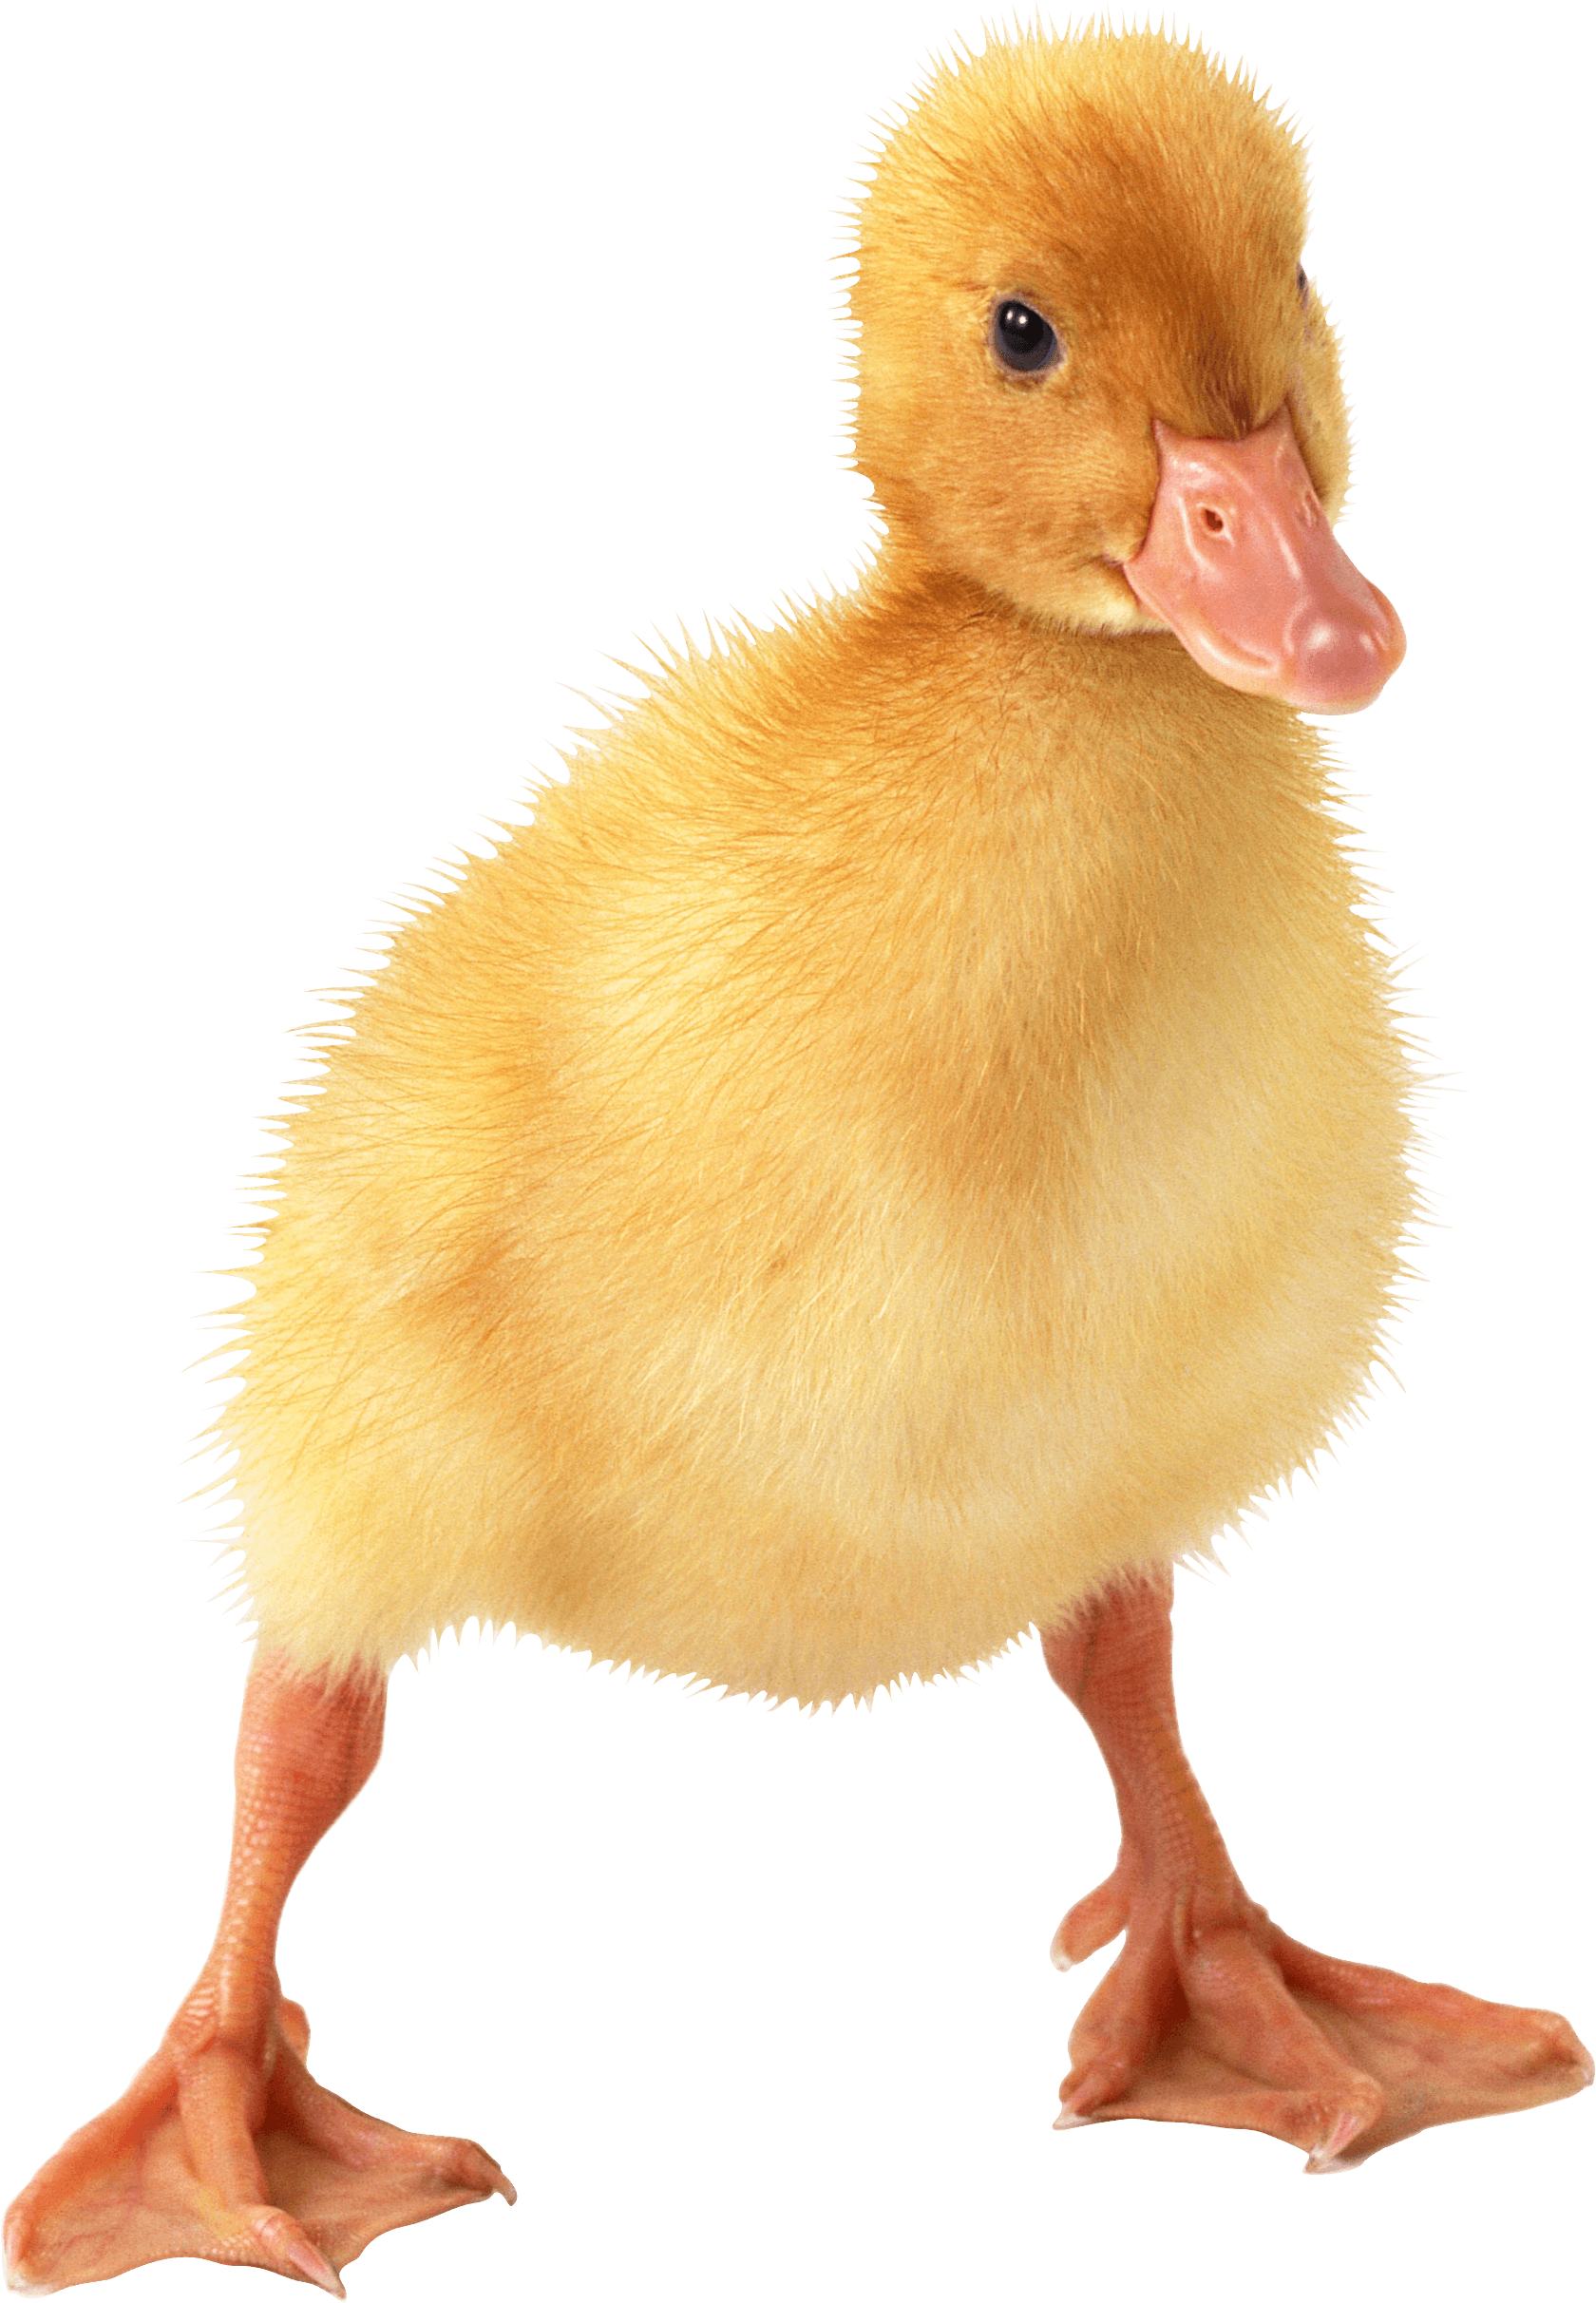 Duckling PNG Free Image